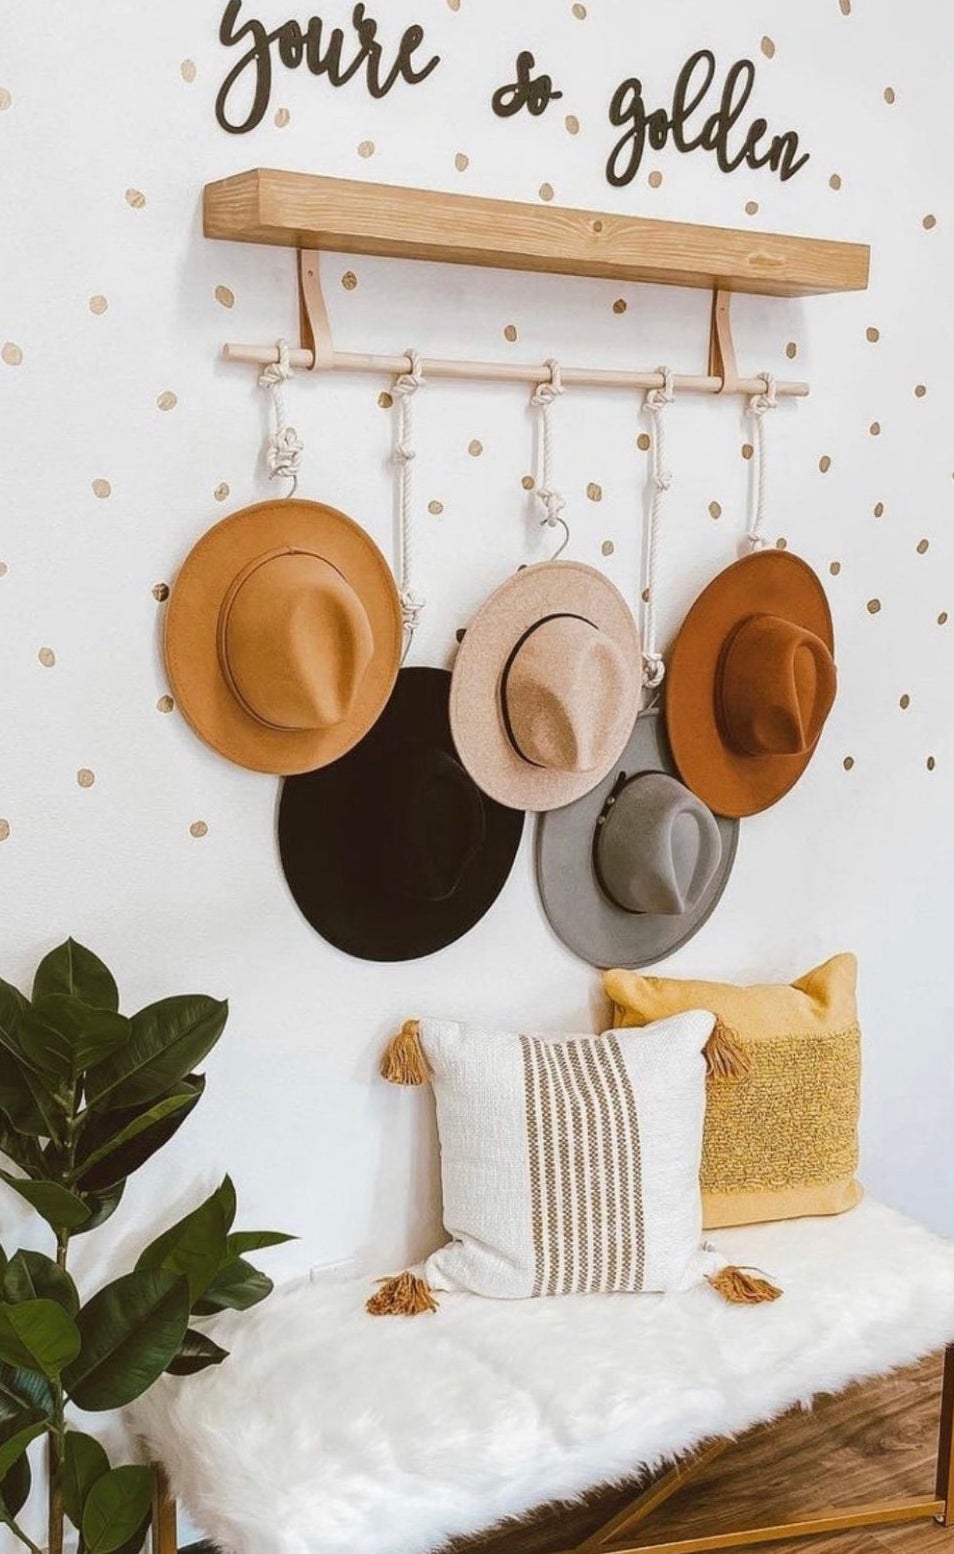 hats hanging from the hooks